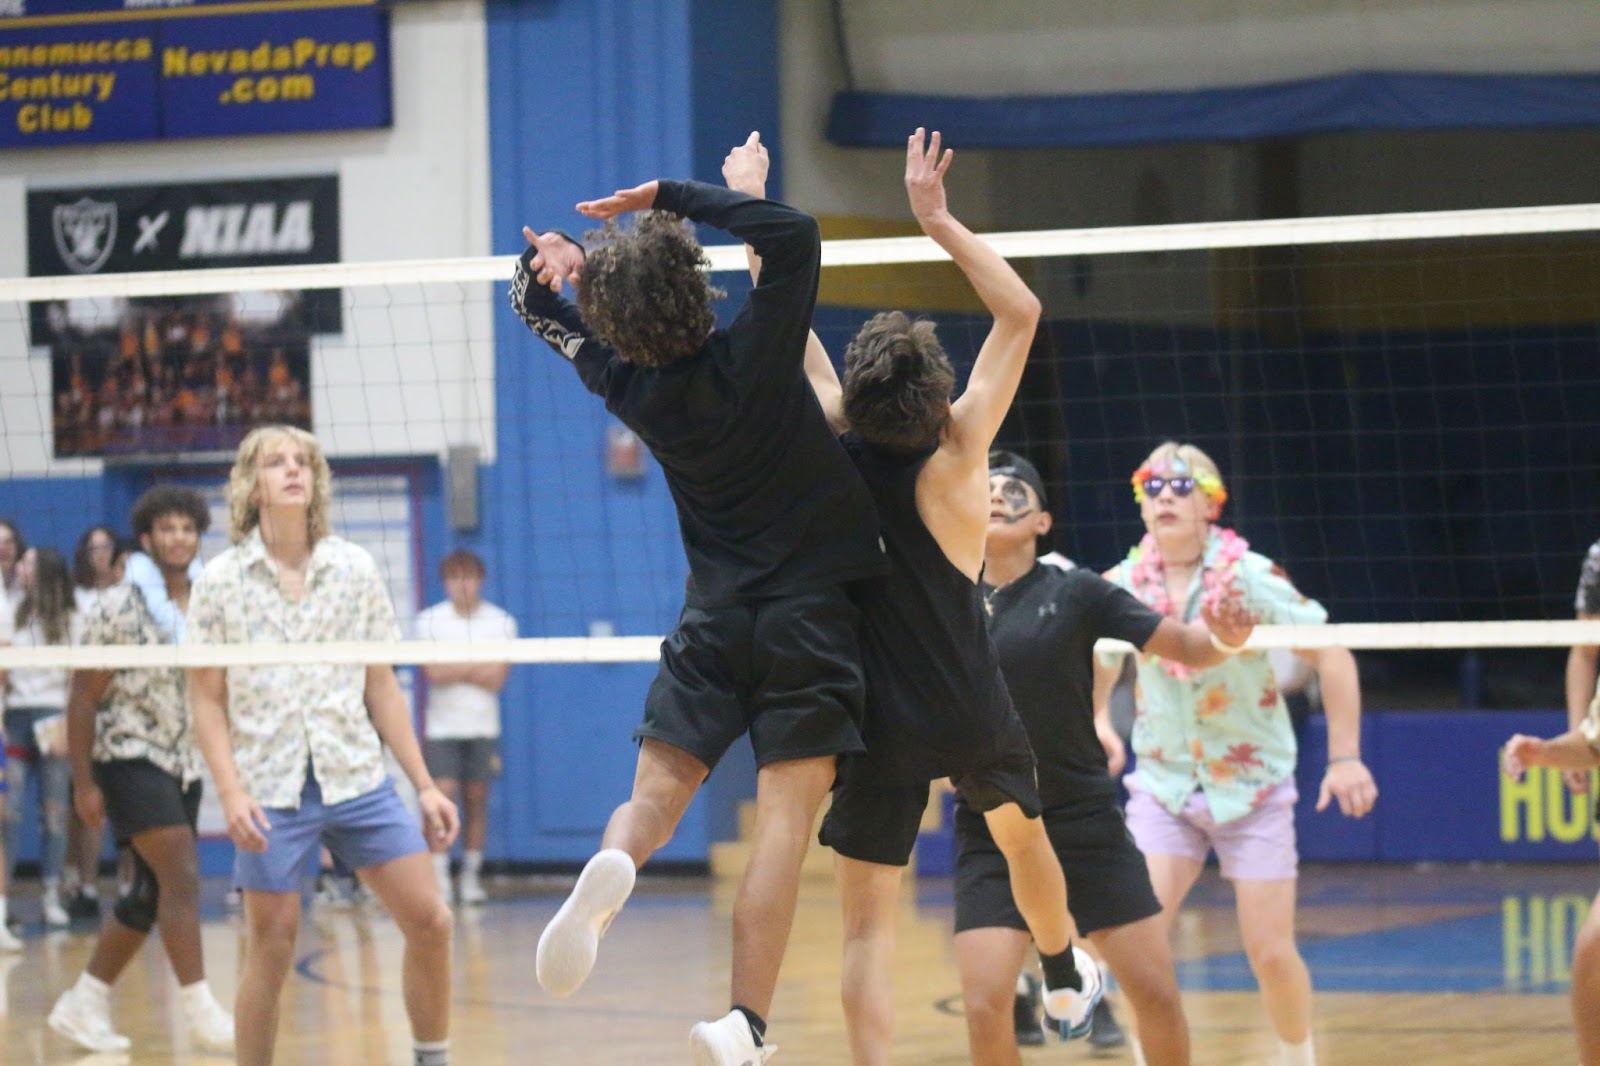 Freshmen Ryan Bales and Txema Beongochea jump for the ball in a he-man volleyball match against the Juniors. /Alexa Toscano • The Brand